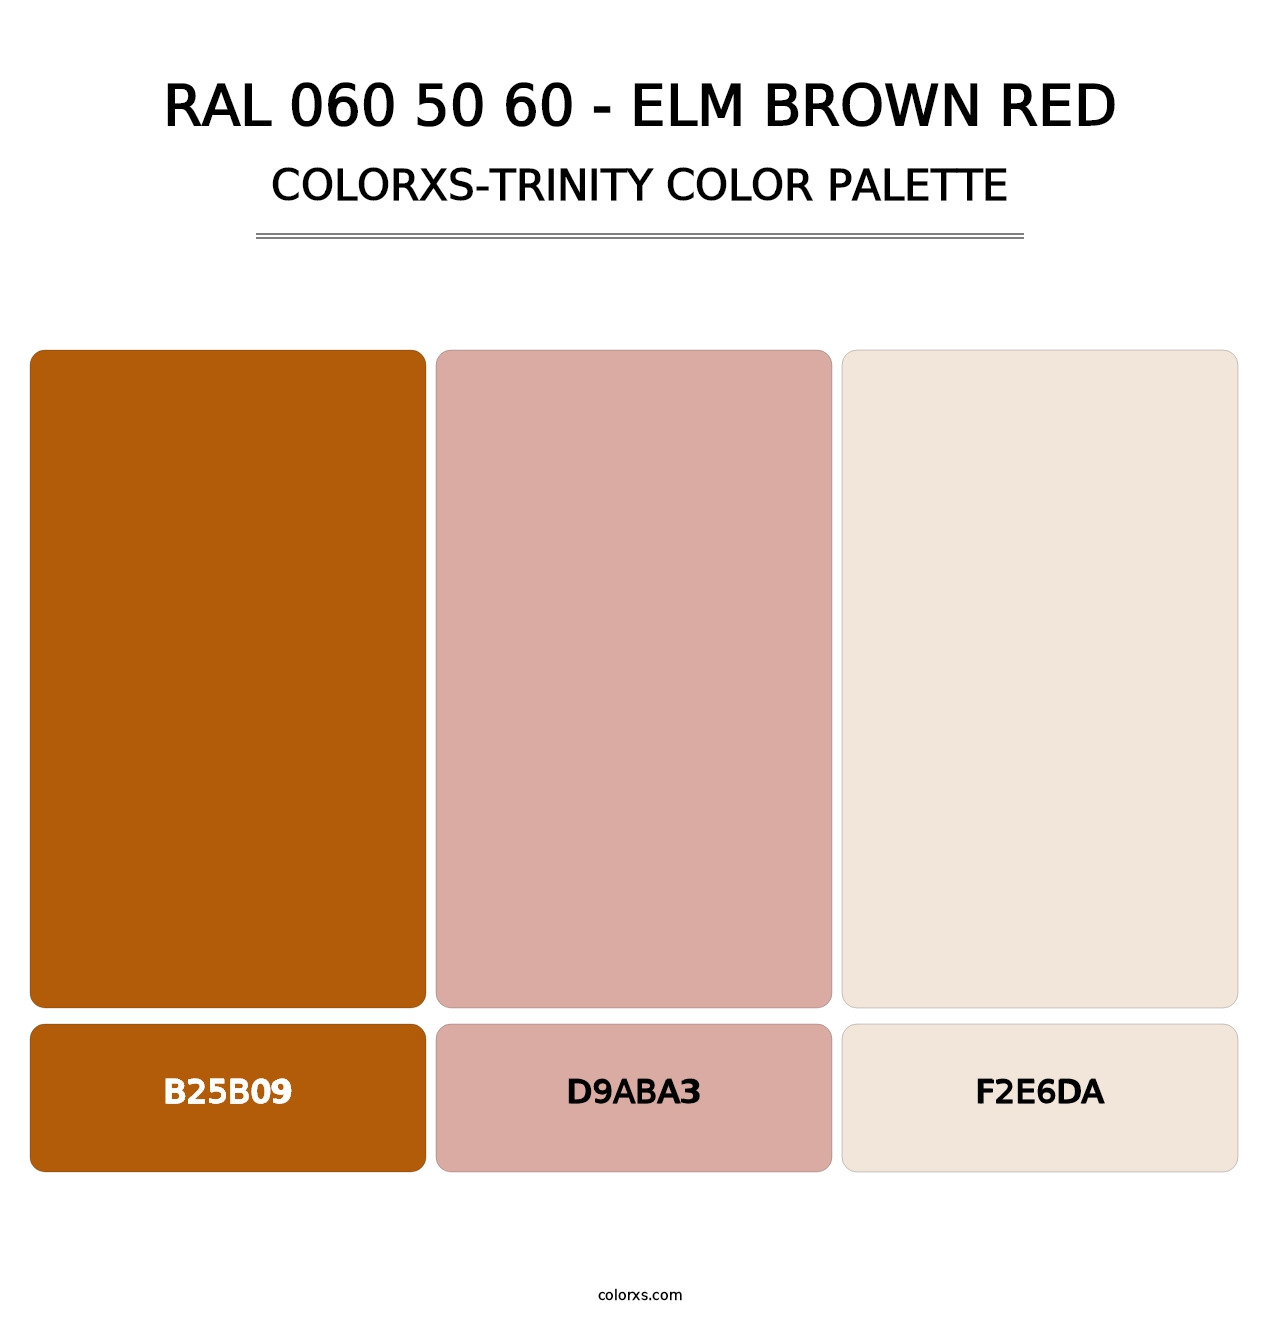 RAL 060 50 60 - Elm Brown Red - Colorxs Trinity Palette